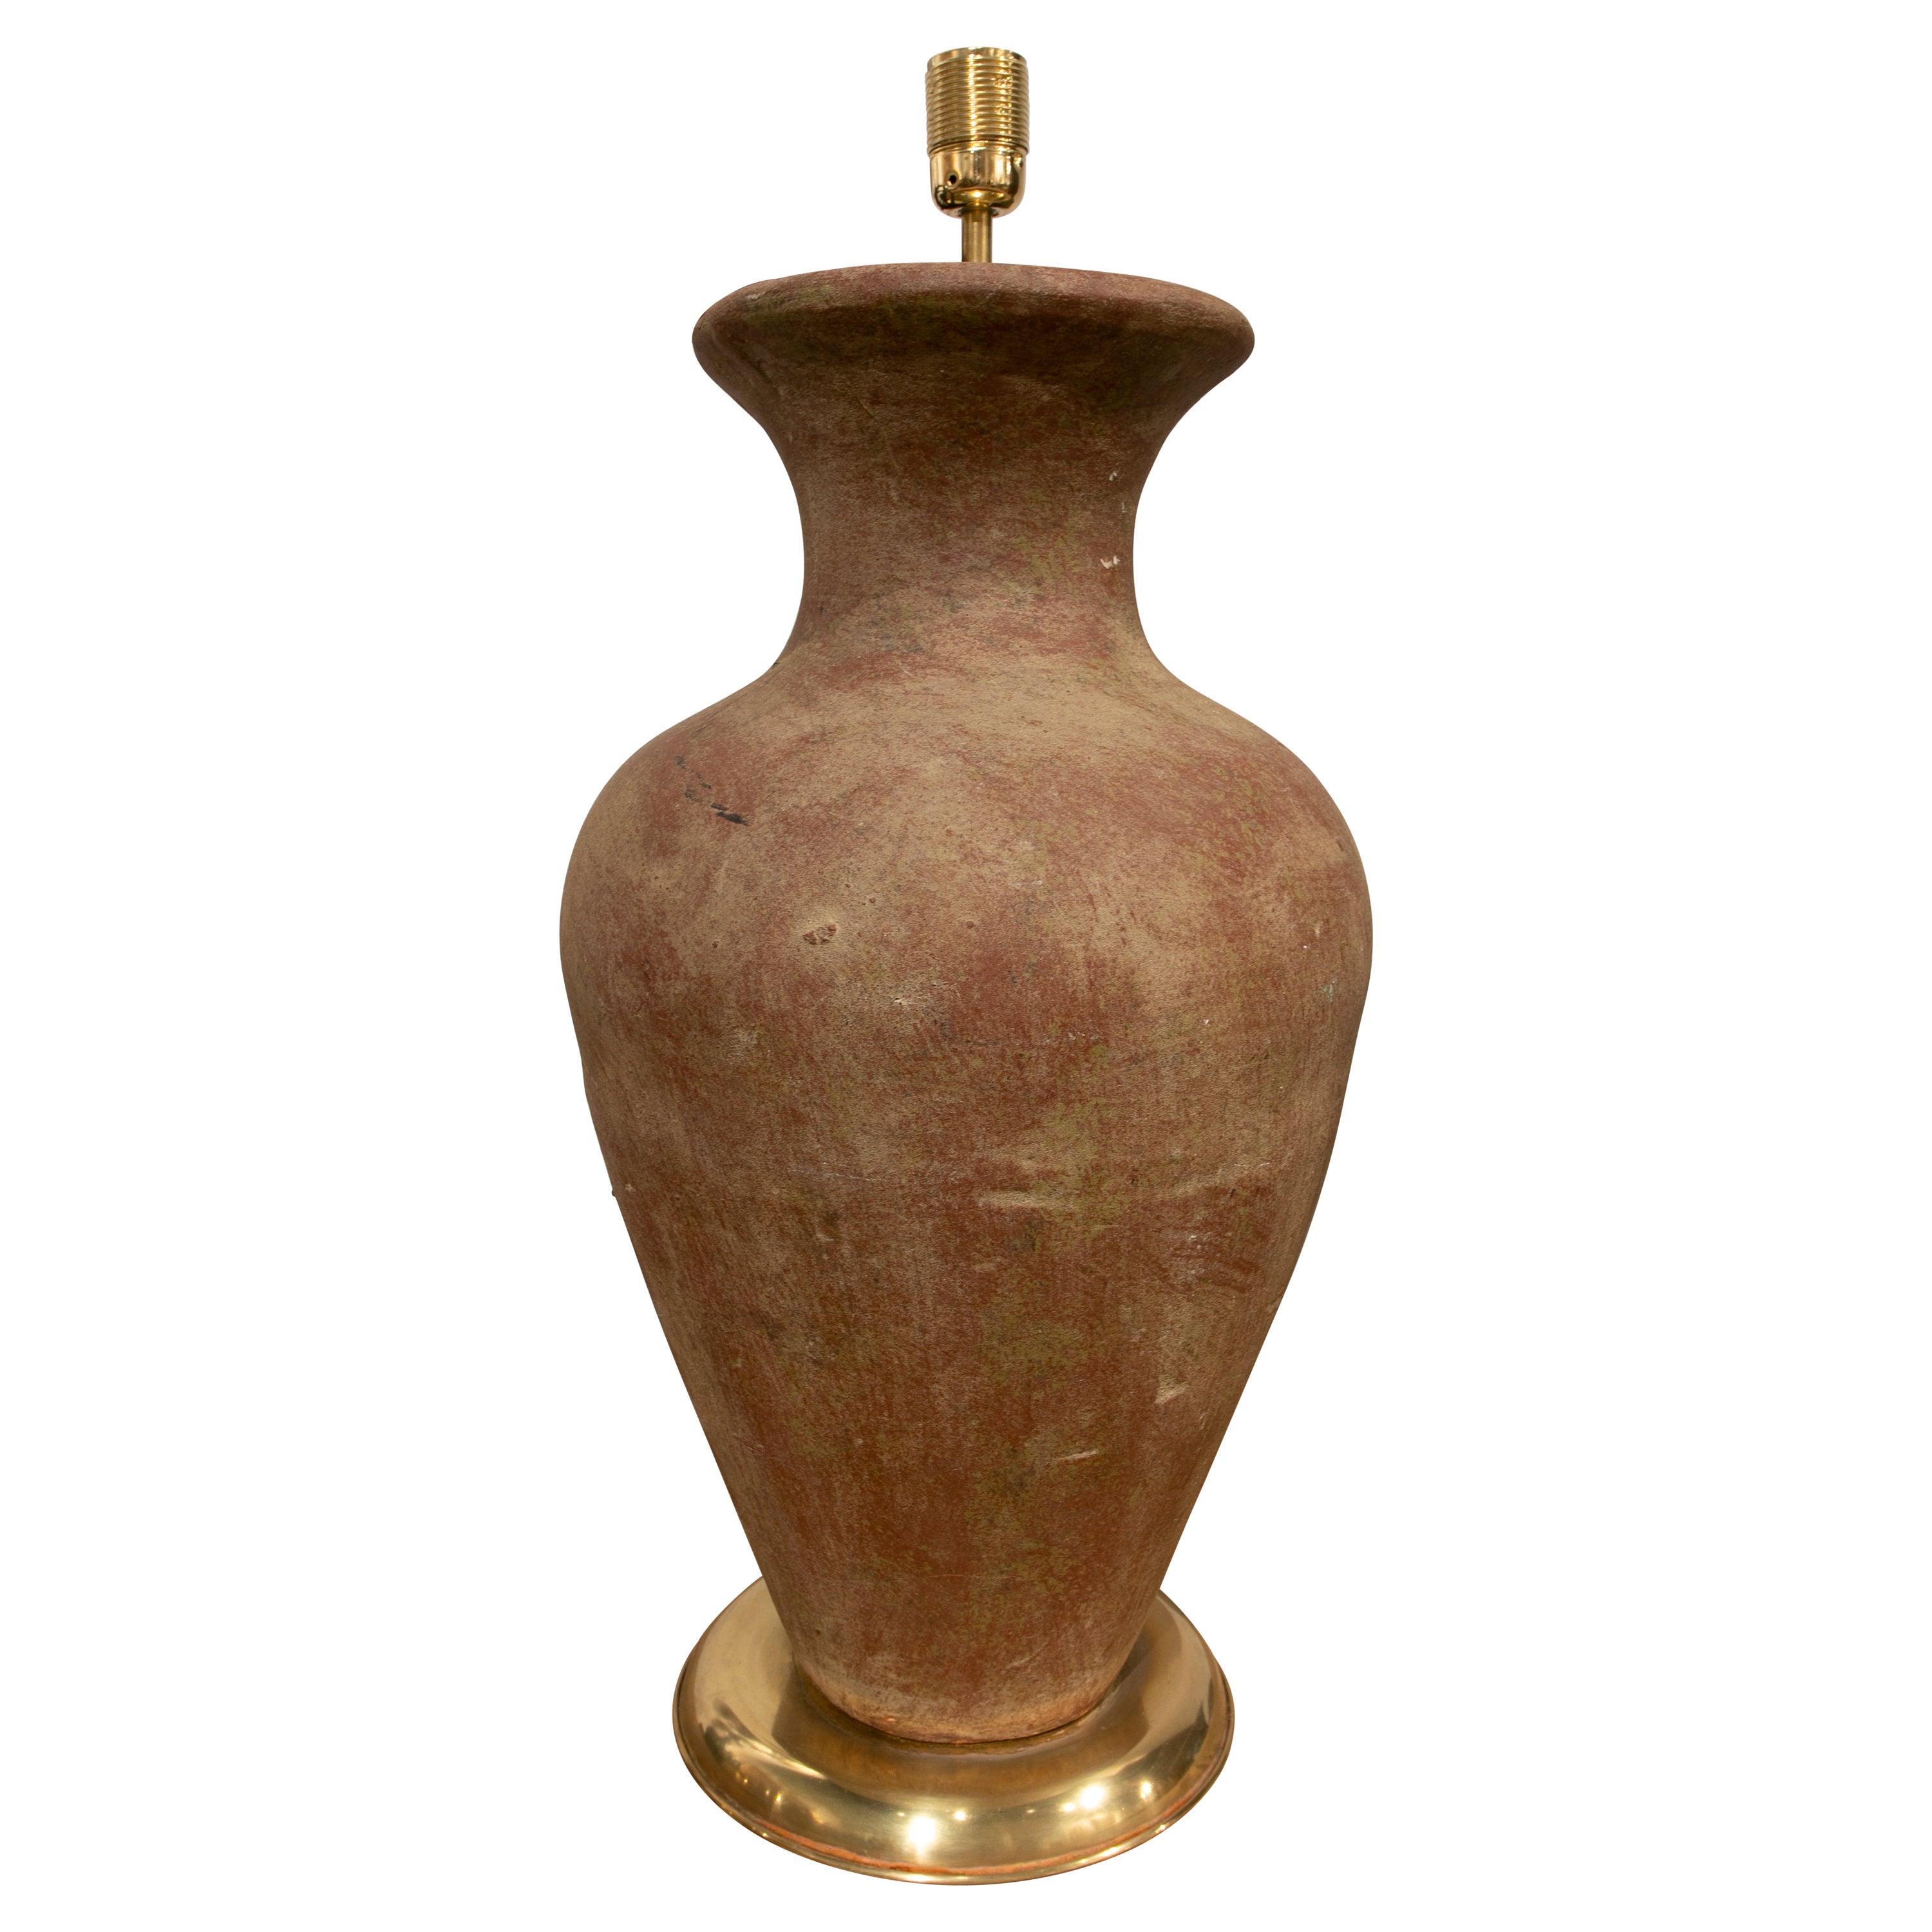 1970s Ceramic Lamp in the Shape of a Vase with a Brass Base